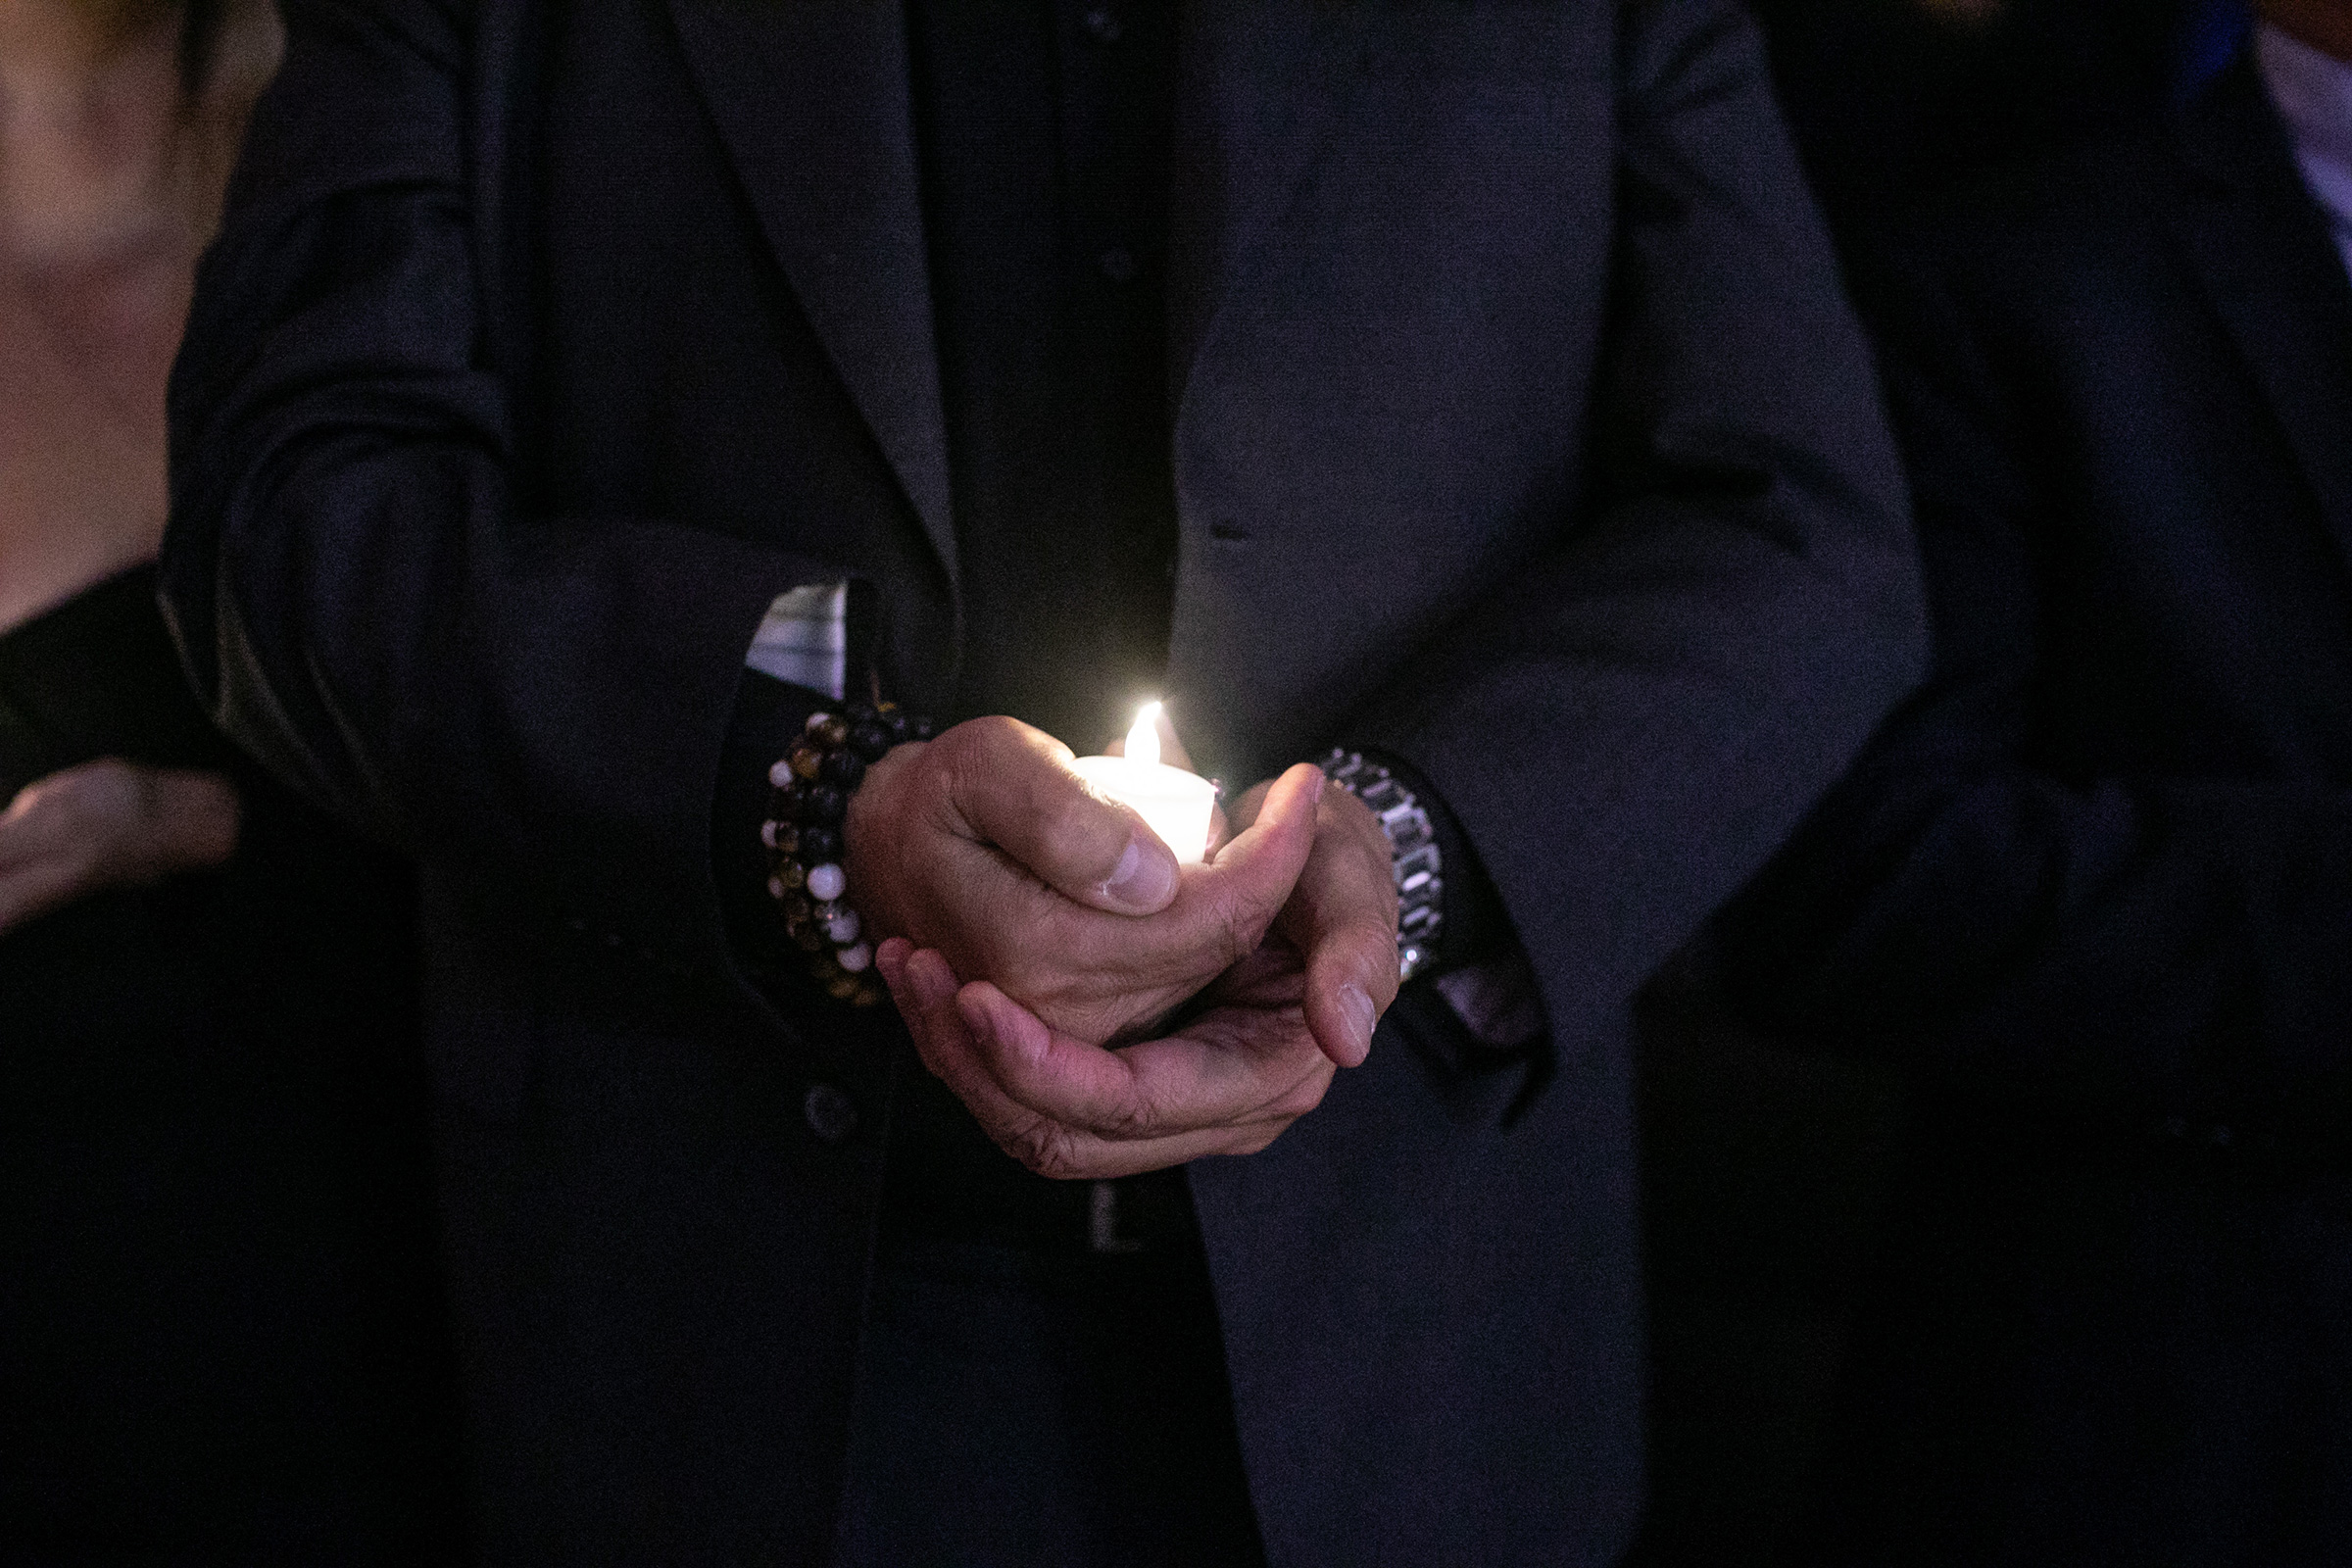 Family, friends and community members gather at a candlelight vigil in Valencia, Calif., for loved ones who died from a fentanyl overdose on March 13, 2023. (Jason Armond—Los Angeles Times/Getty Images)